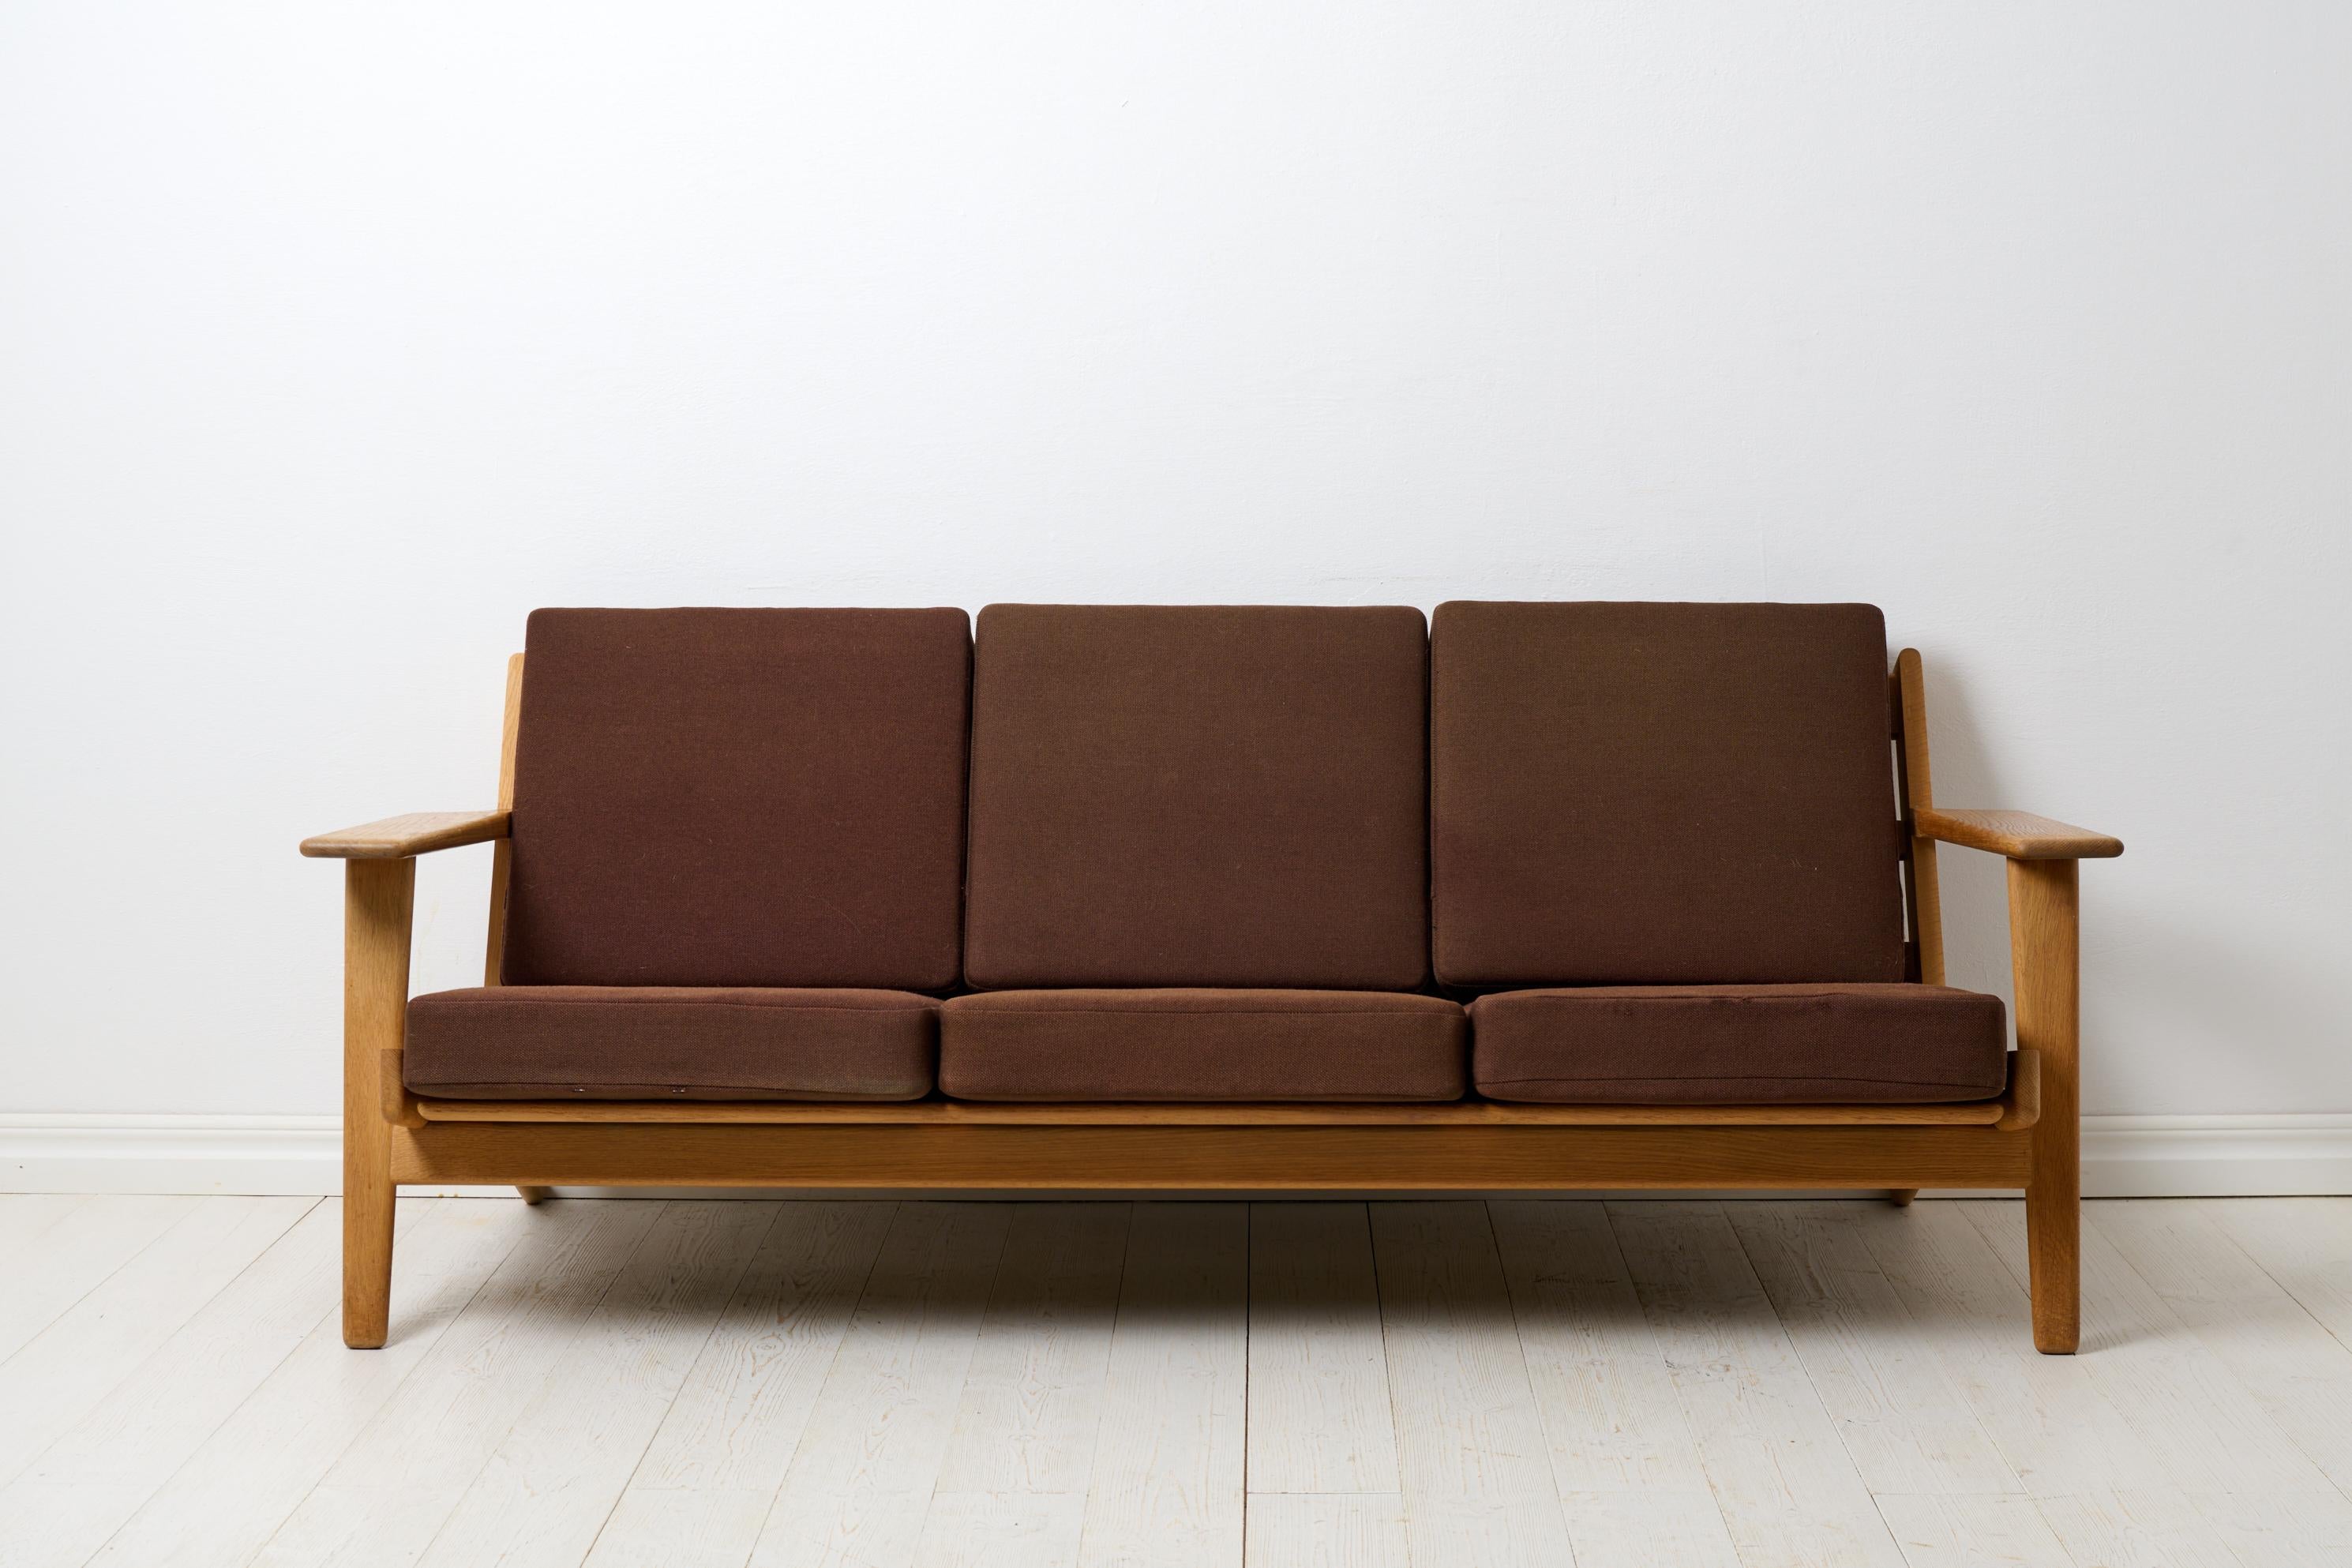 Vintage Hans J. Wegner sofa model GE-290 for Getama Gedsted, Denmark. The sofa is a mid century classic by one of the most famous names of the time, Hans J. Wegner (Denmark, 1914-2007). This sofa is made in oak with loose cushions upholstered in